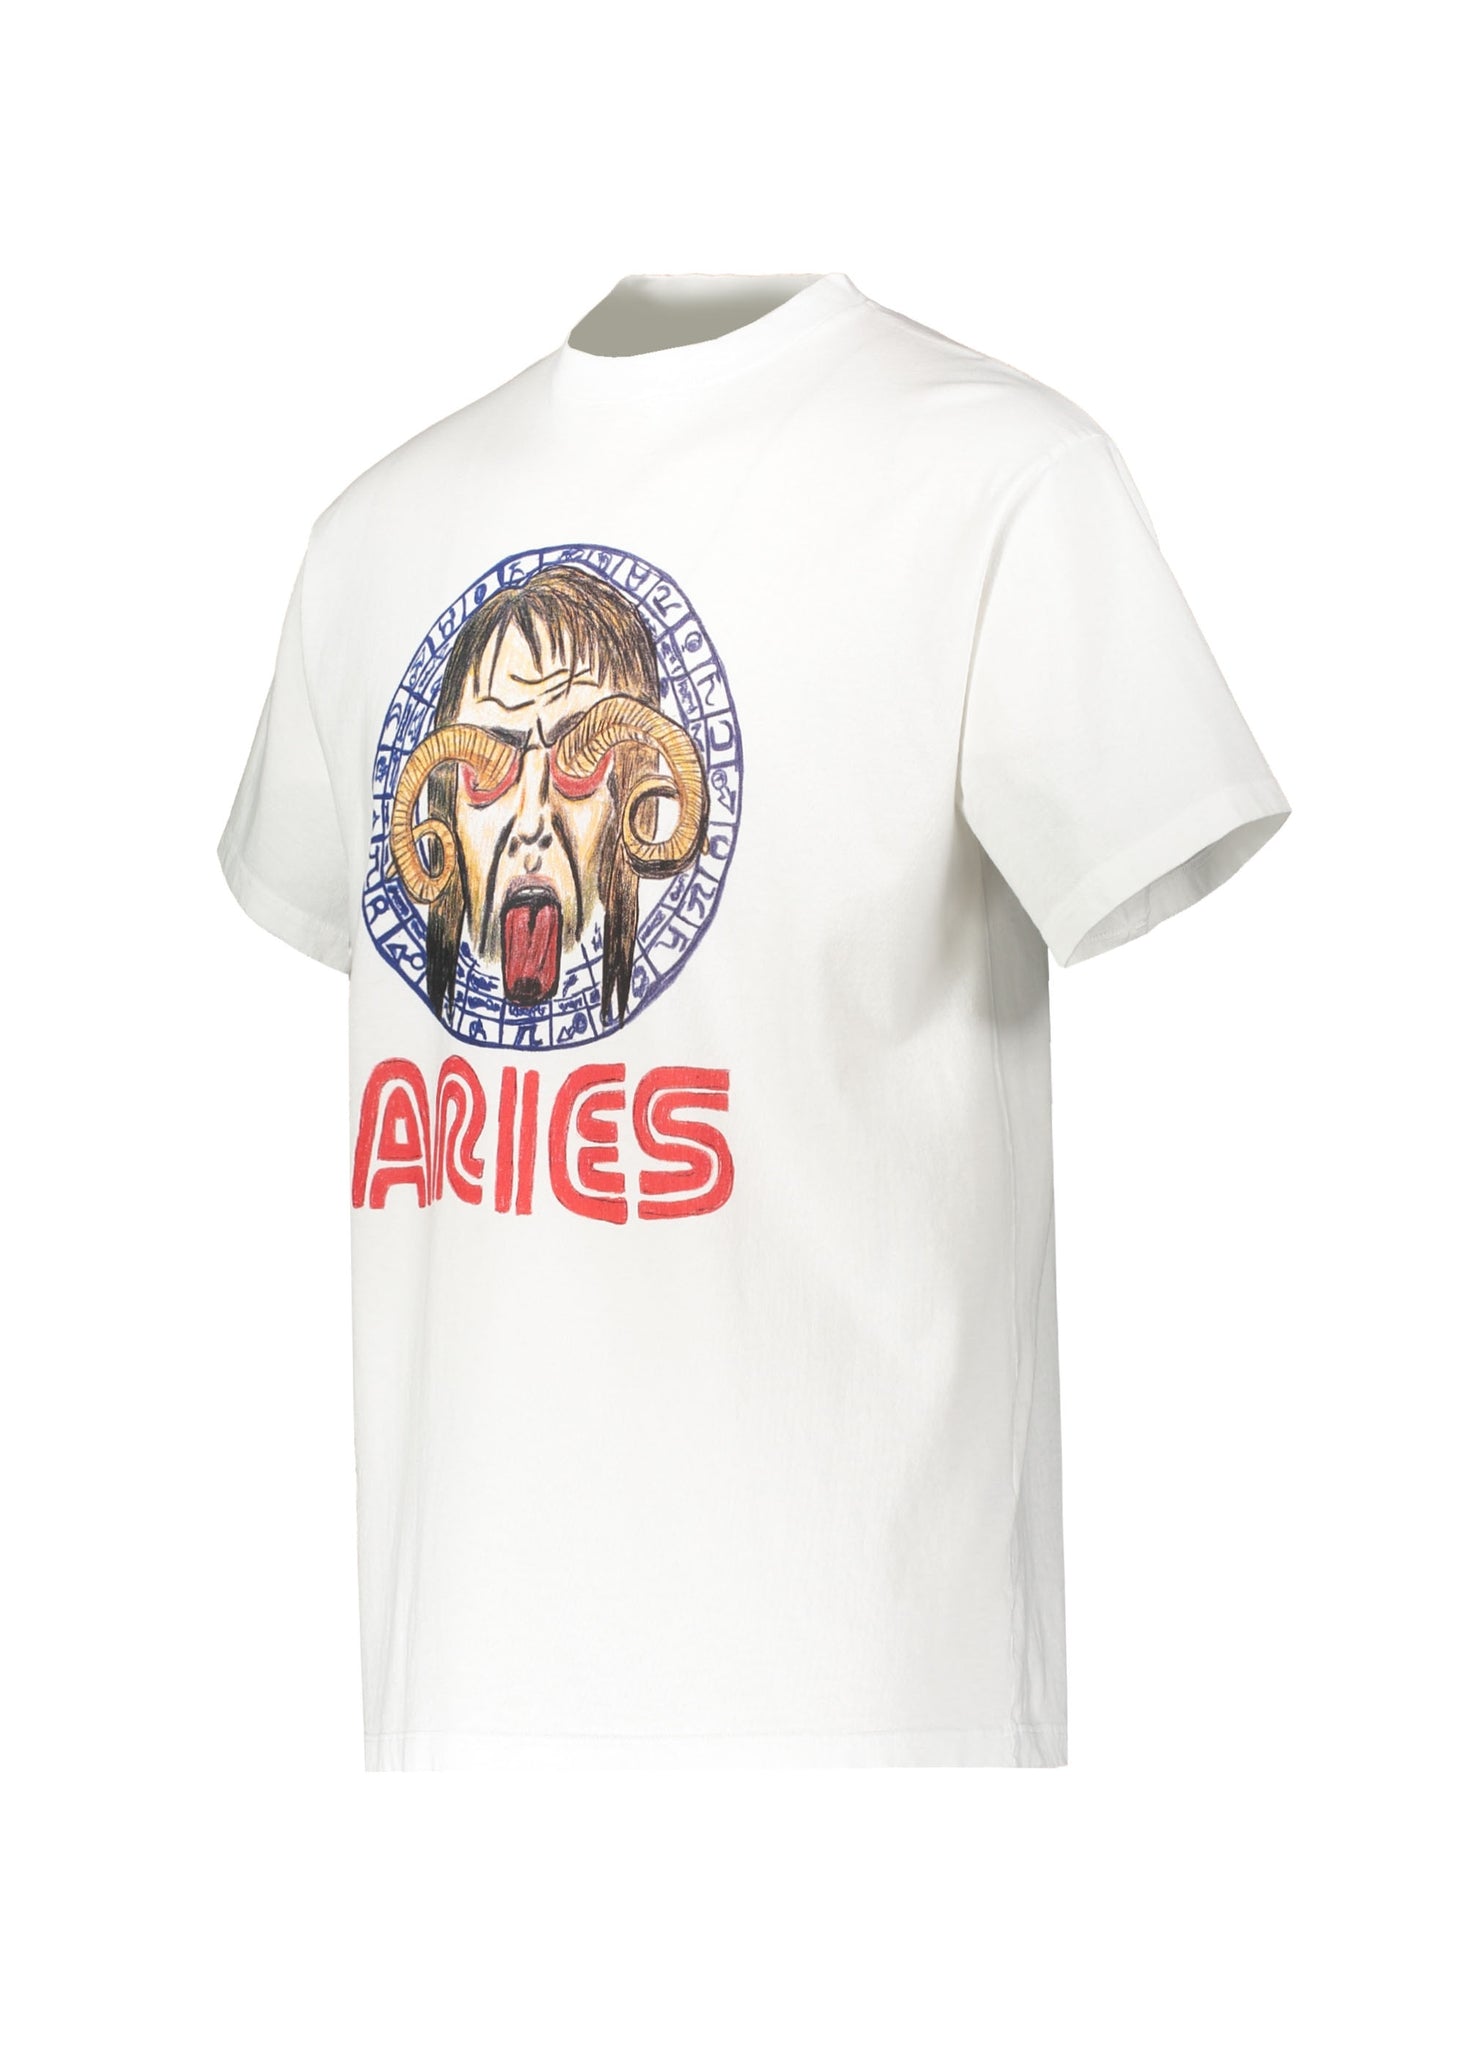 Aries Astrology for Aliens Tee - White